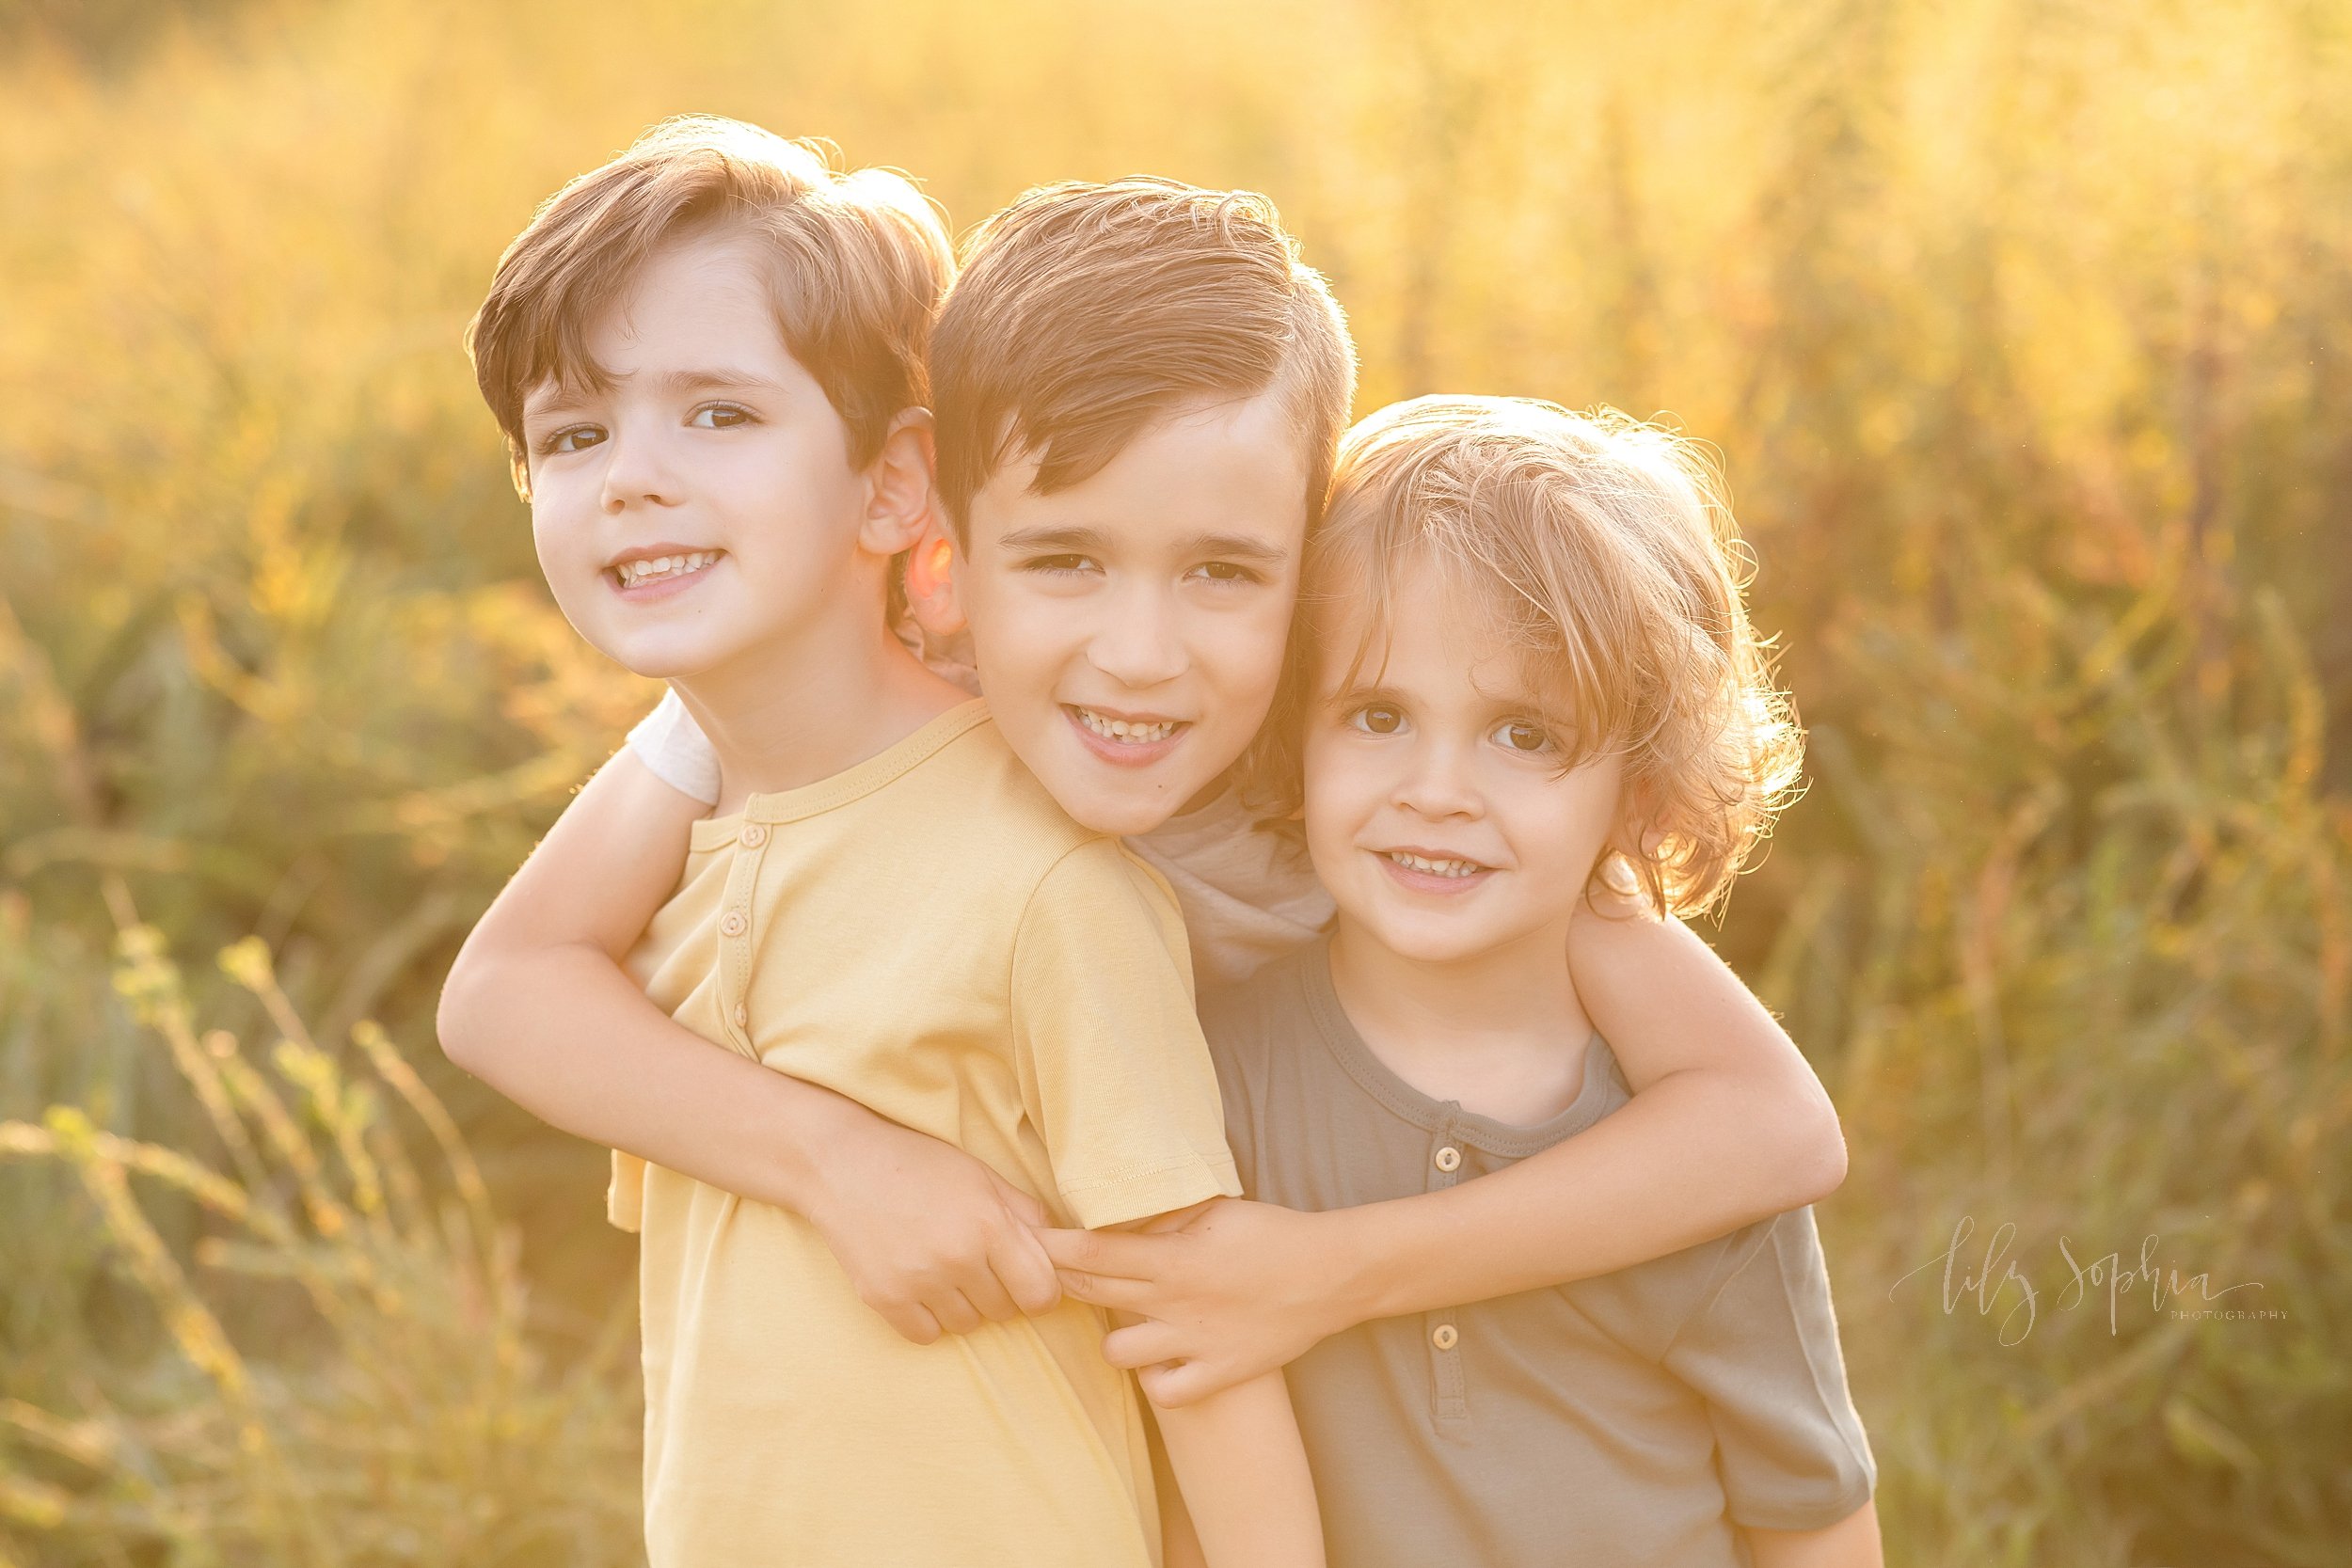  Family photo session with three brothers taken in an Atlanta field at sunset as the eldest brother wraps his arms around his younger brothers. 